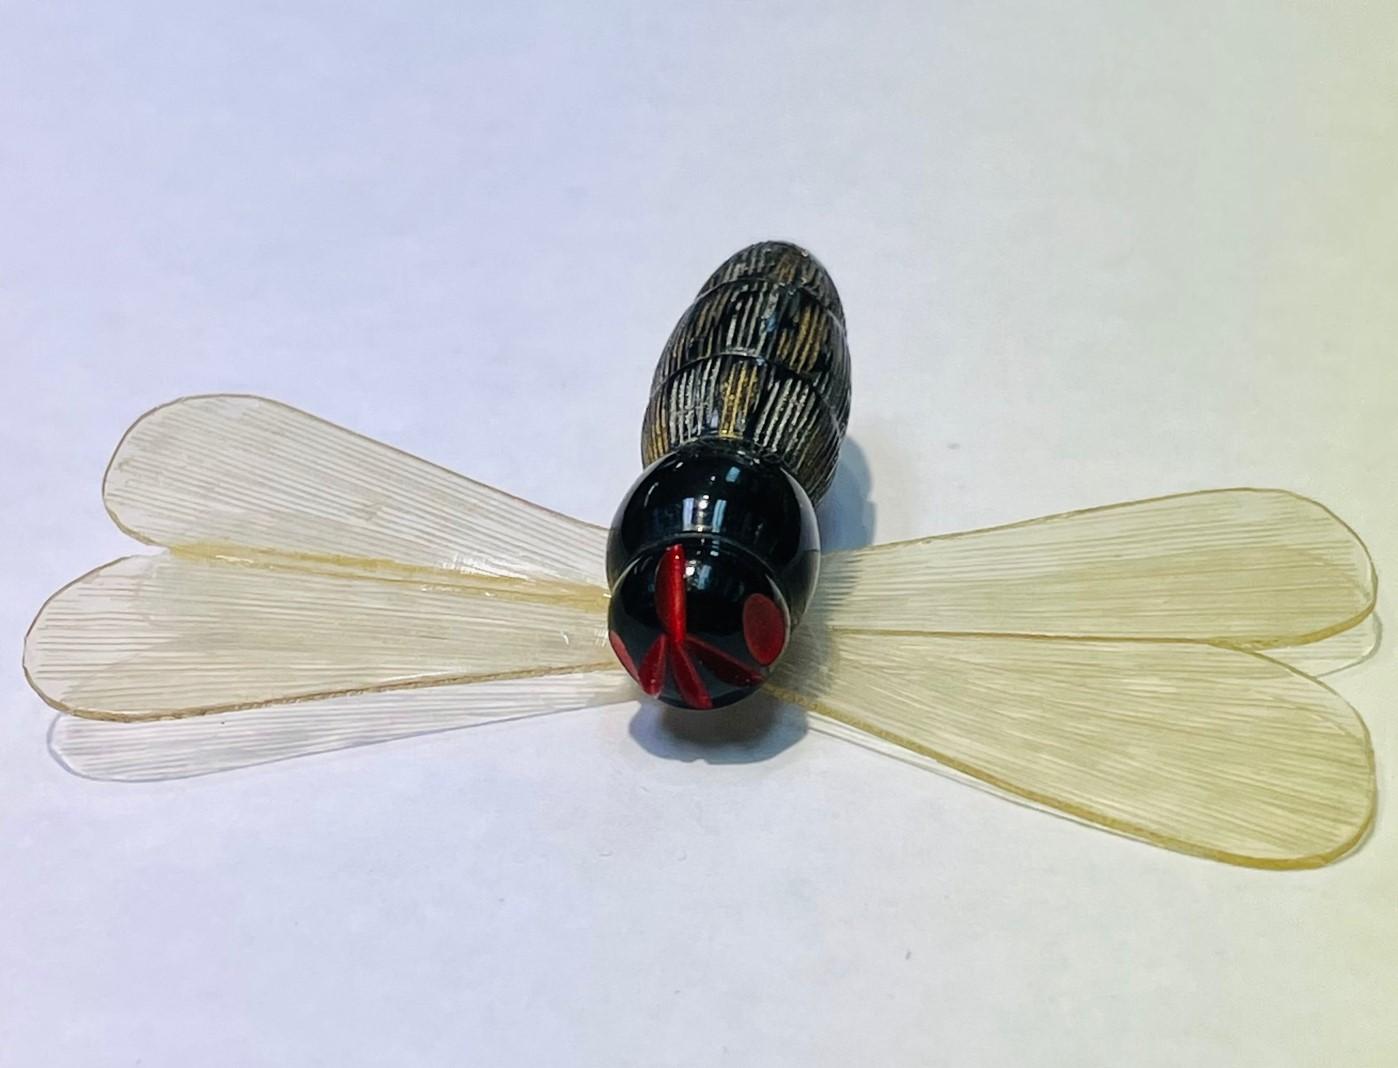 Fabulous and Light as a feather Celluloid Dragonfly brooch. Circa 1930s. Transparent wings molded Celluloid figurative body with stick pin and bulldog closure system. Measuring approx. 3